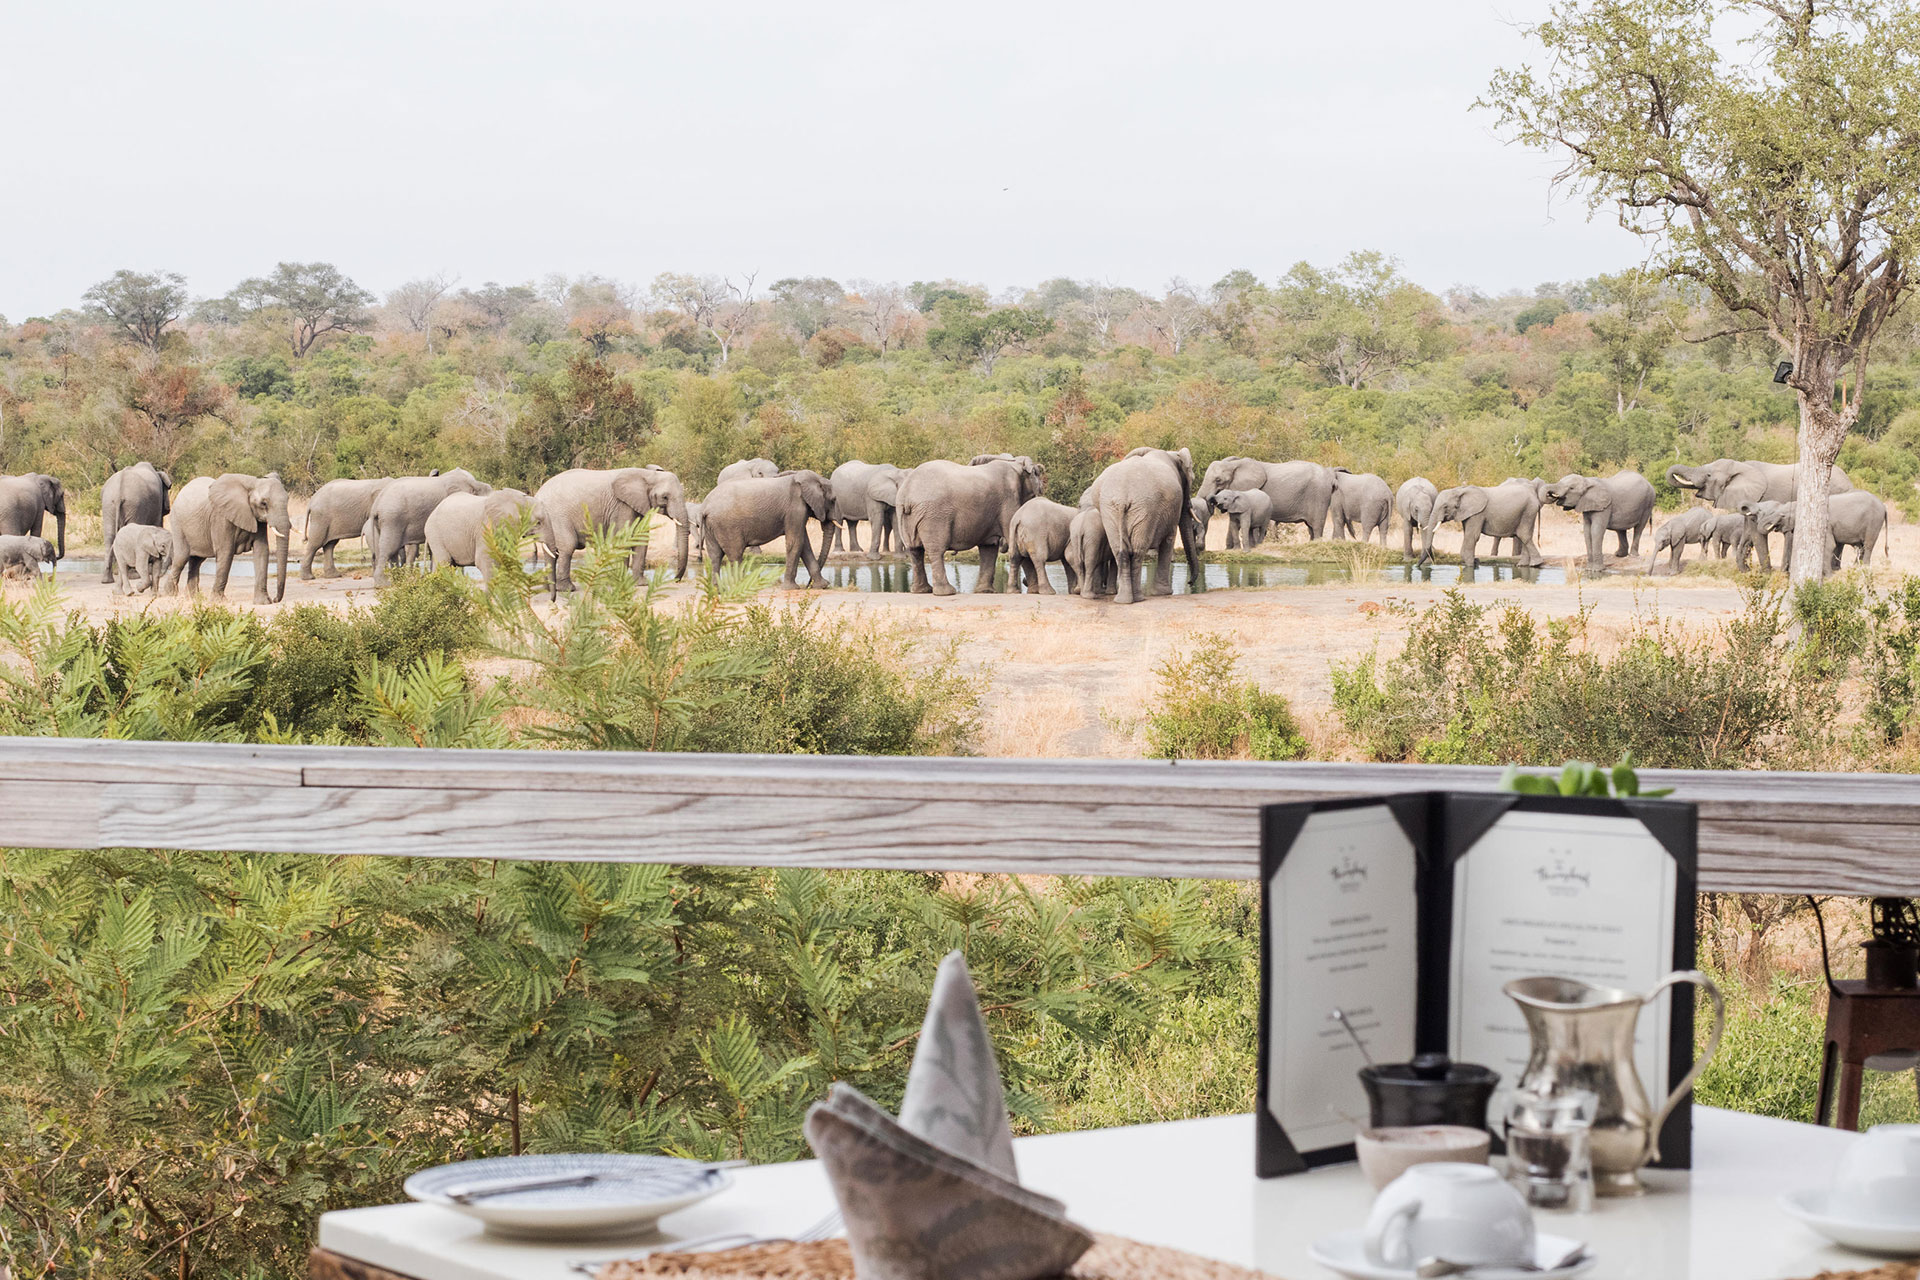 A herd of elephants seen gathering at the waterhole from the dining area at Simbambili Game Lodge – a lodge from the Thornybush collection.